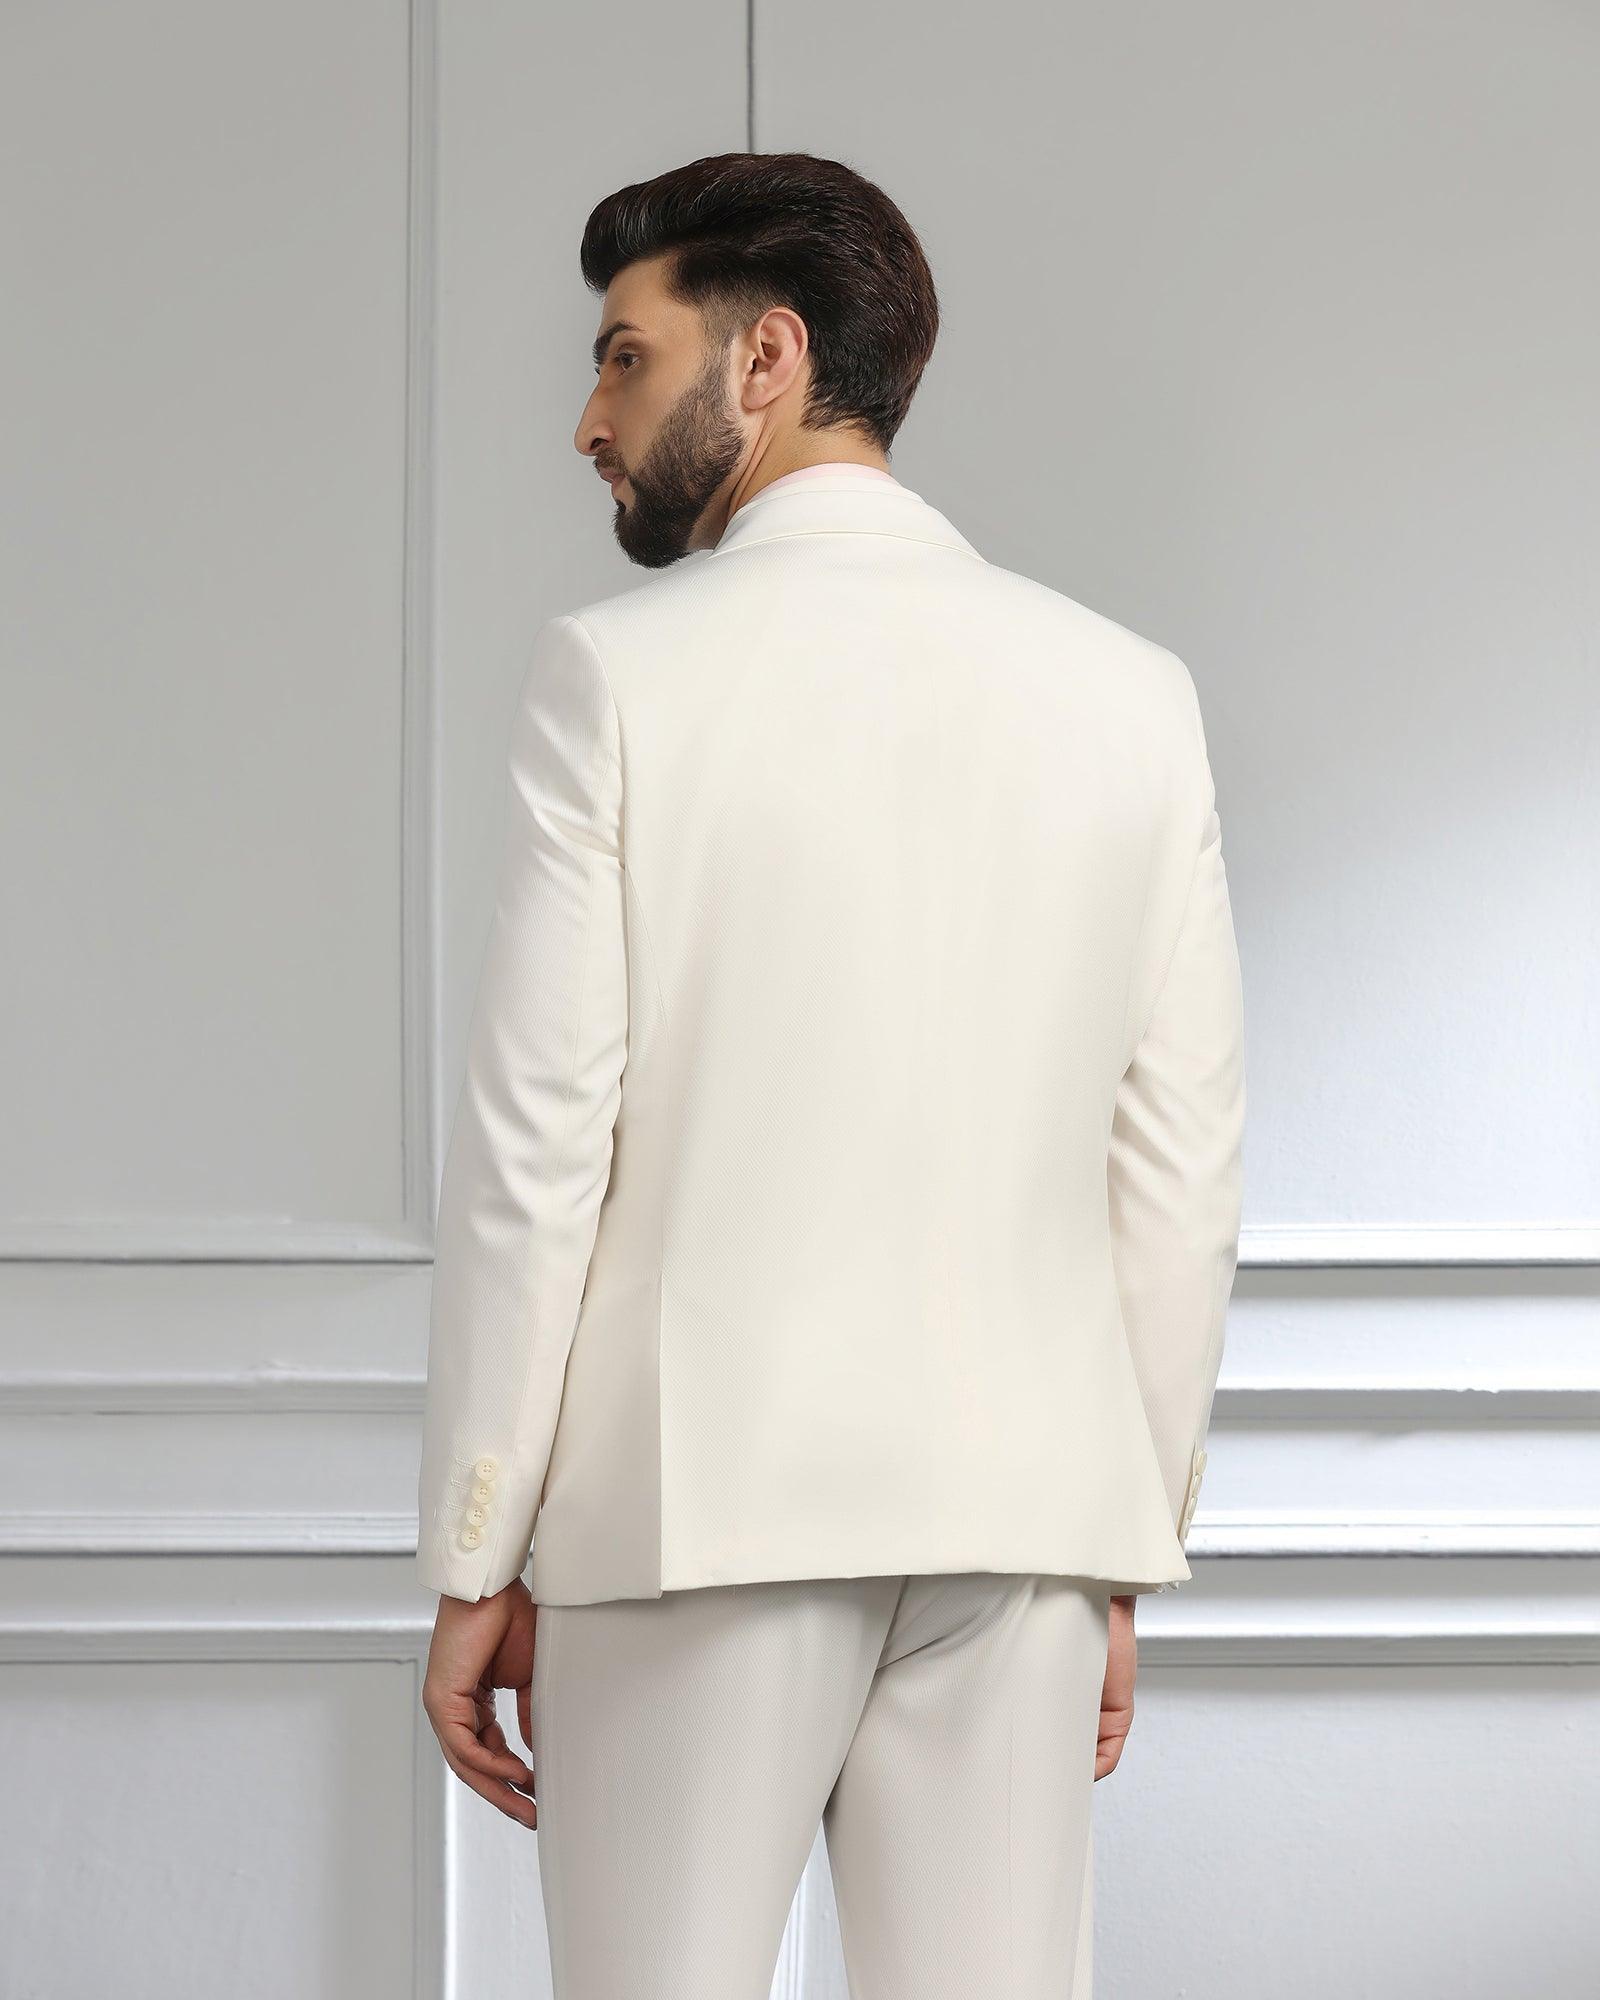 White Wedding Suits for Your GROOM